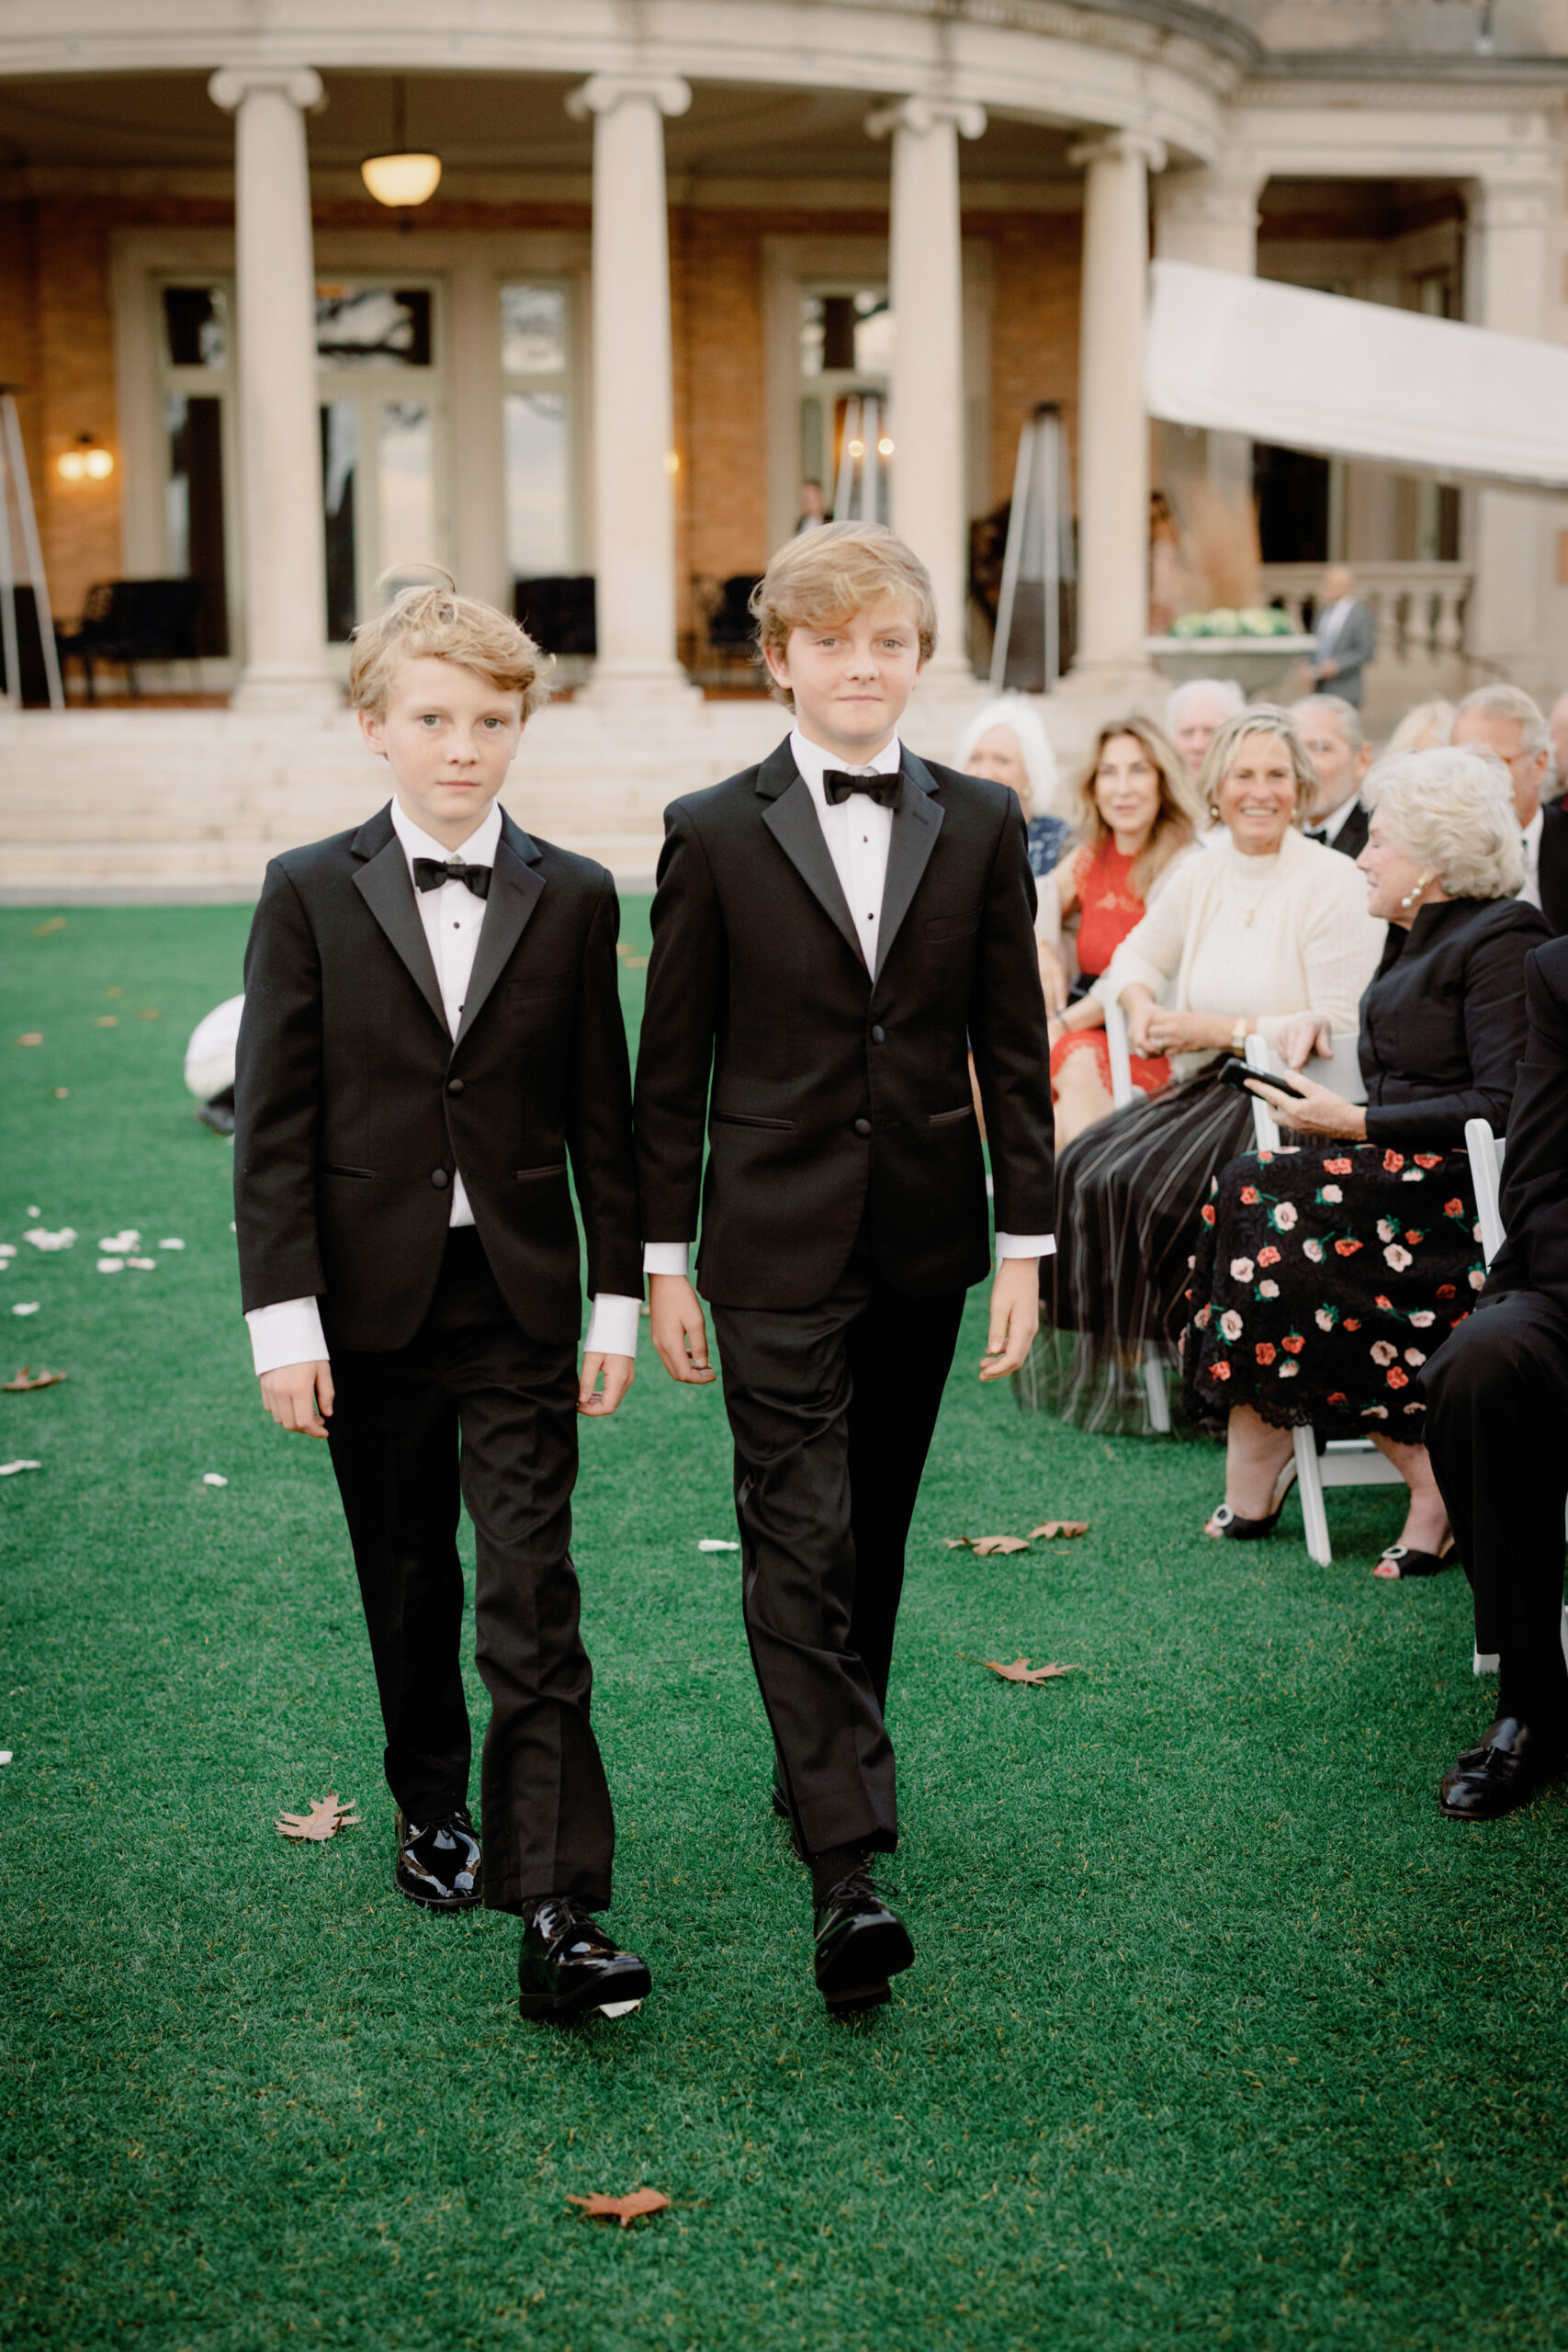 Image of the young men walking down the aisle at Sleepy Hollow Country Club, NY. Image by Jenny Fu Studio